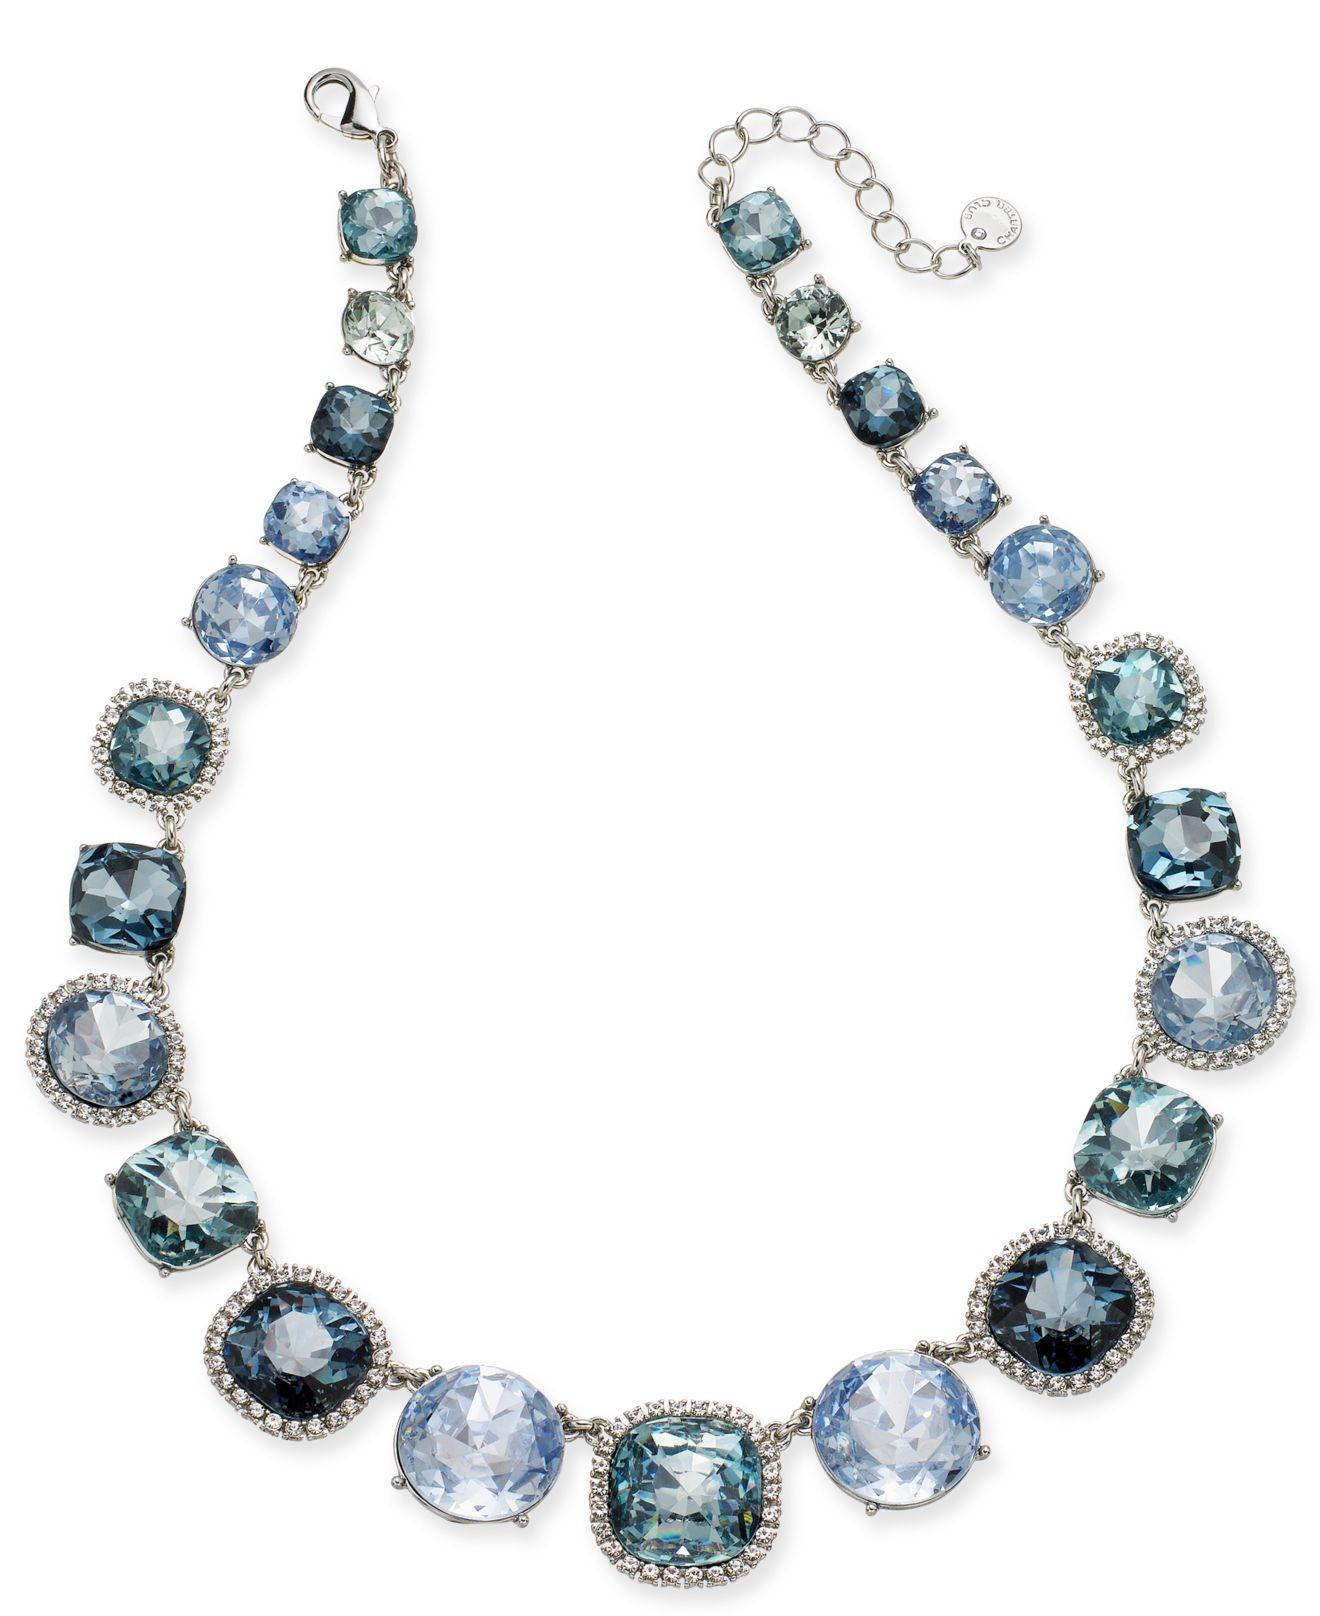 Lyst - Charter Club Silver-tone Stone And Crystal Necklace, 17-1/2